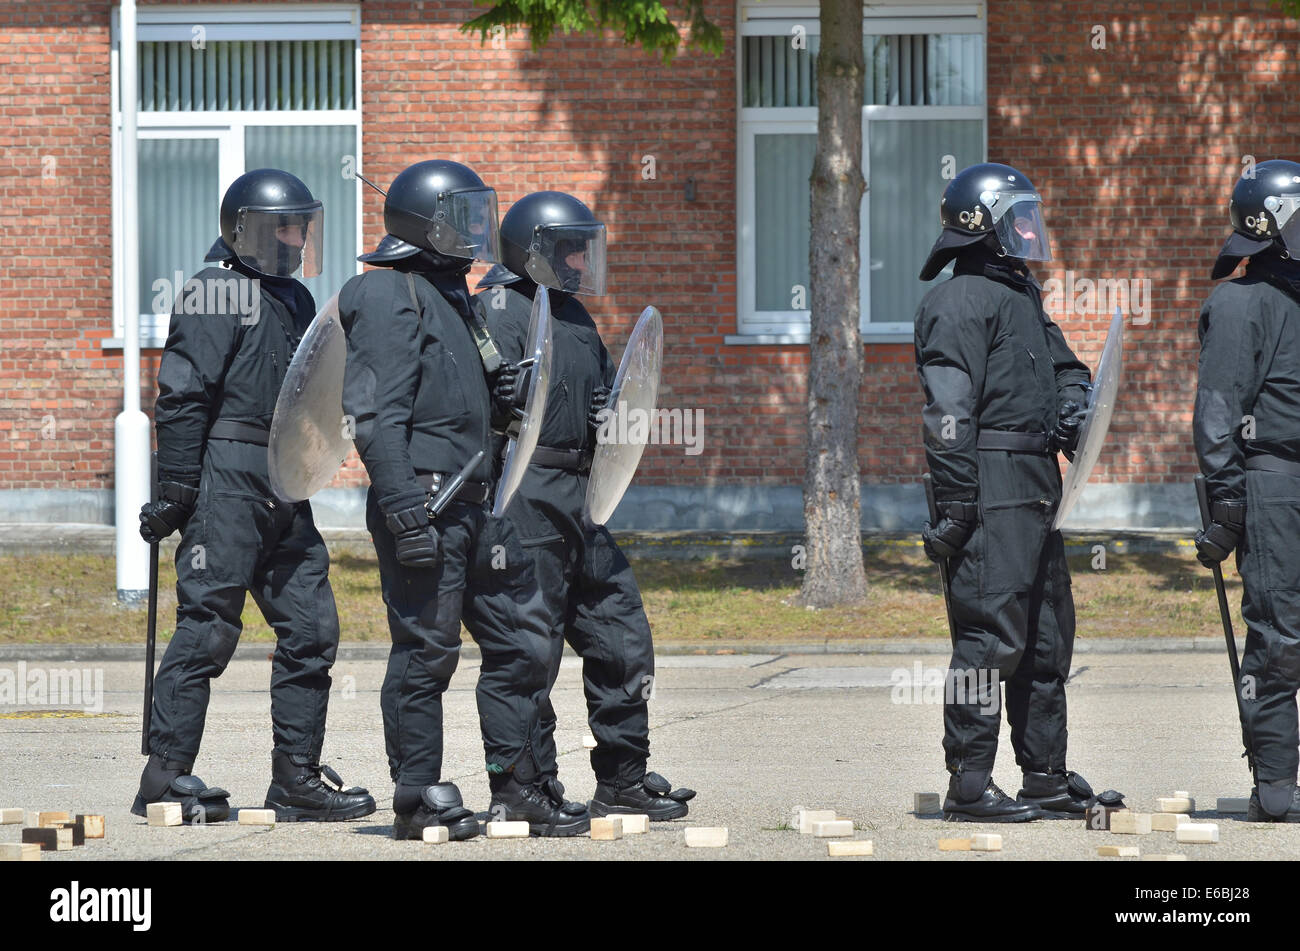 Infantry soldiers of the Belgian Army in riot gear during a training session in Leopoldsburg, Belgium. Stock Photo